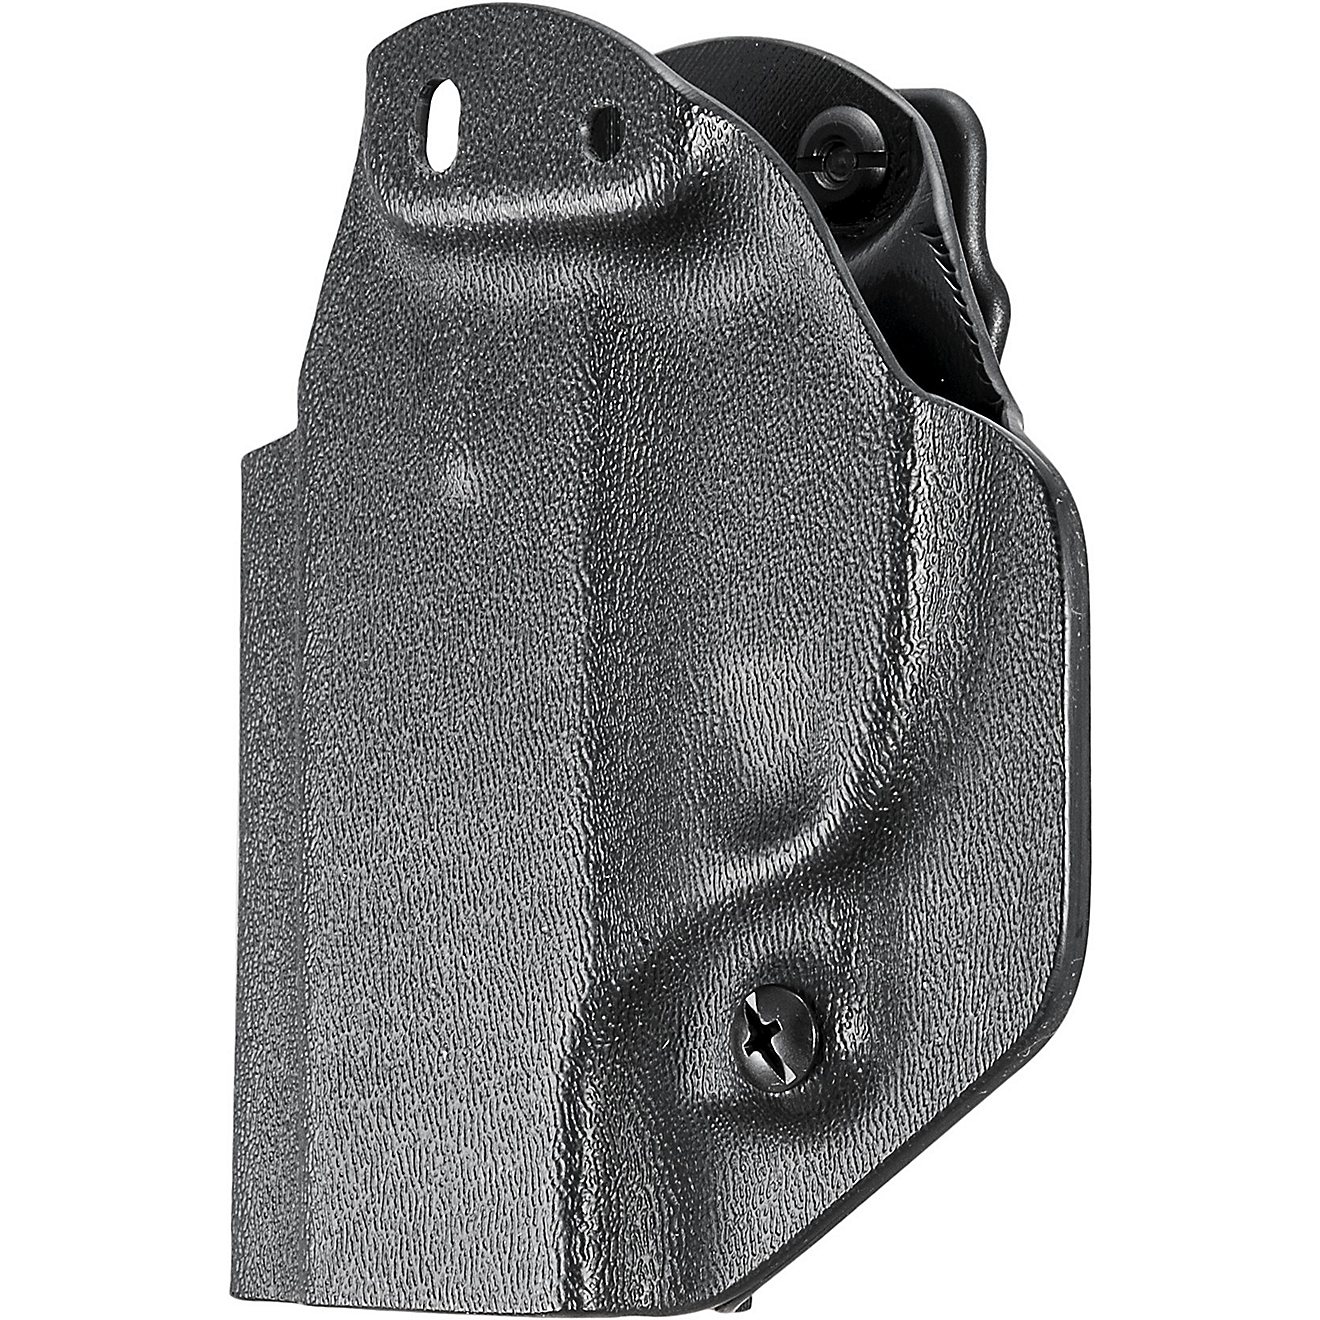 Mission First Tactical Ruger EC9S/EC9/LC9S/LC9 Ambidextrous IWB/OWB Holster                                                      - view number 2